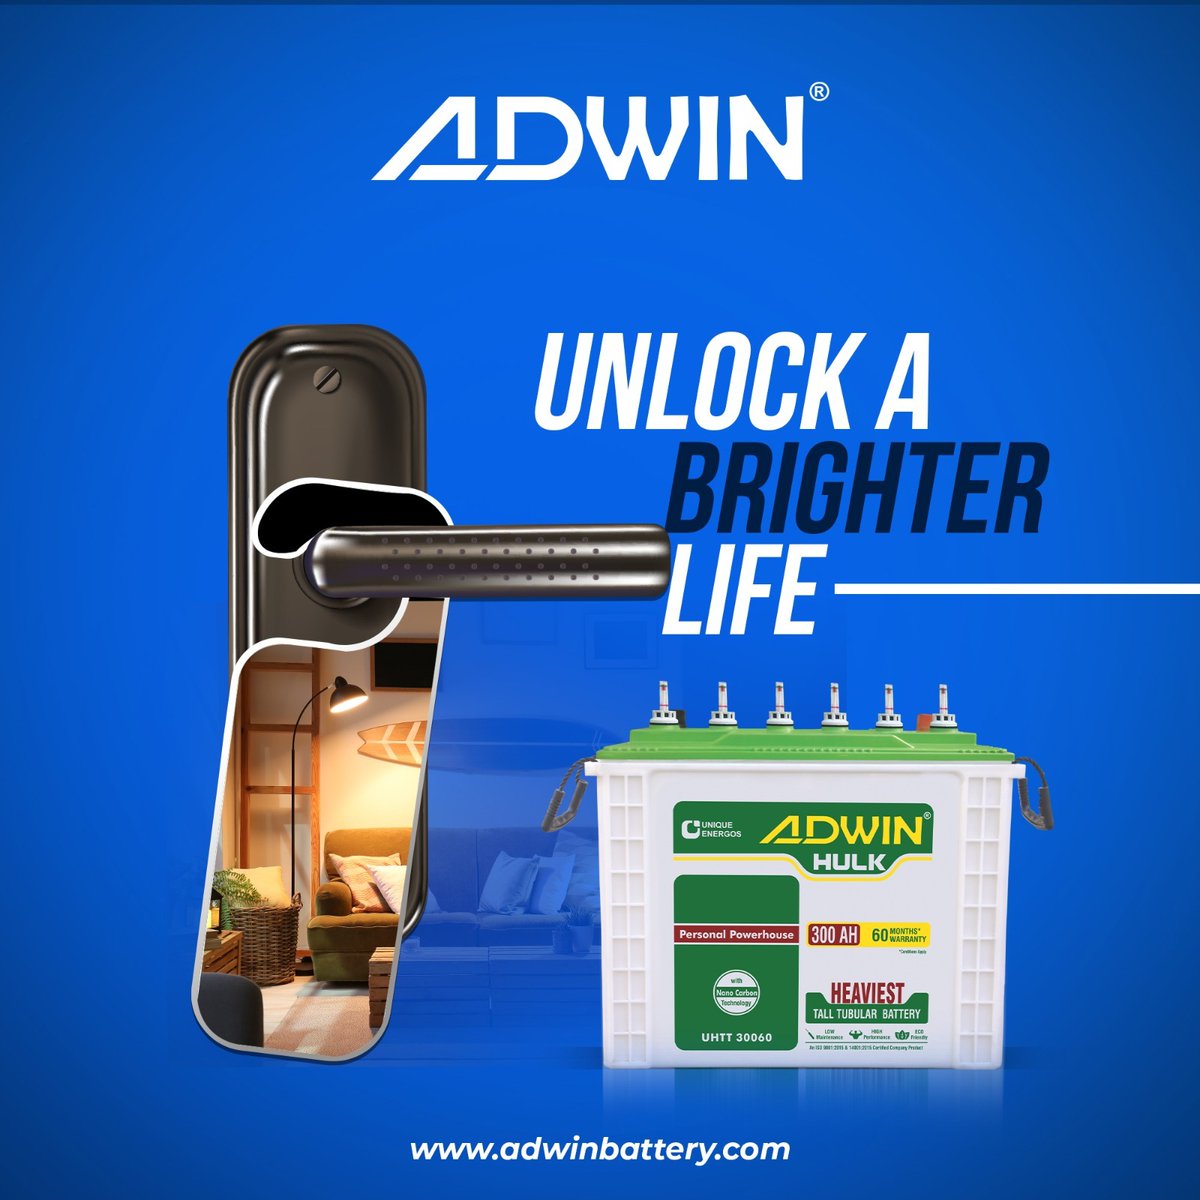 Unlock a brighter life with our inverter battery and experience reliable, long-lasting power for your home.

#Adwin #AdwinBatteries #Battery #TallTubularBattery #InverterBattery #HomeBattery #BatteryLife #BatteryBusiness #BatteryIndustry #India